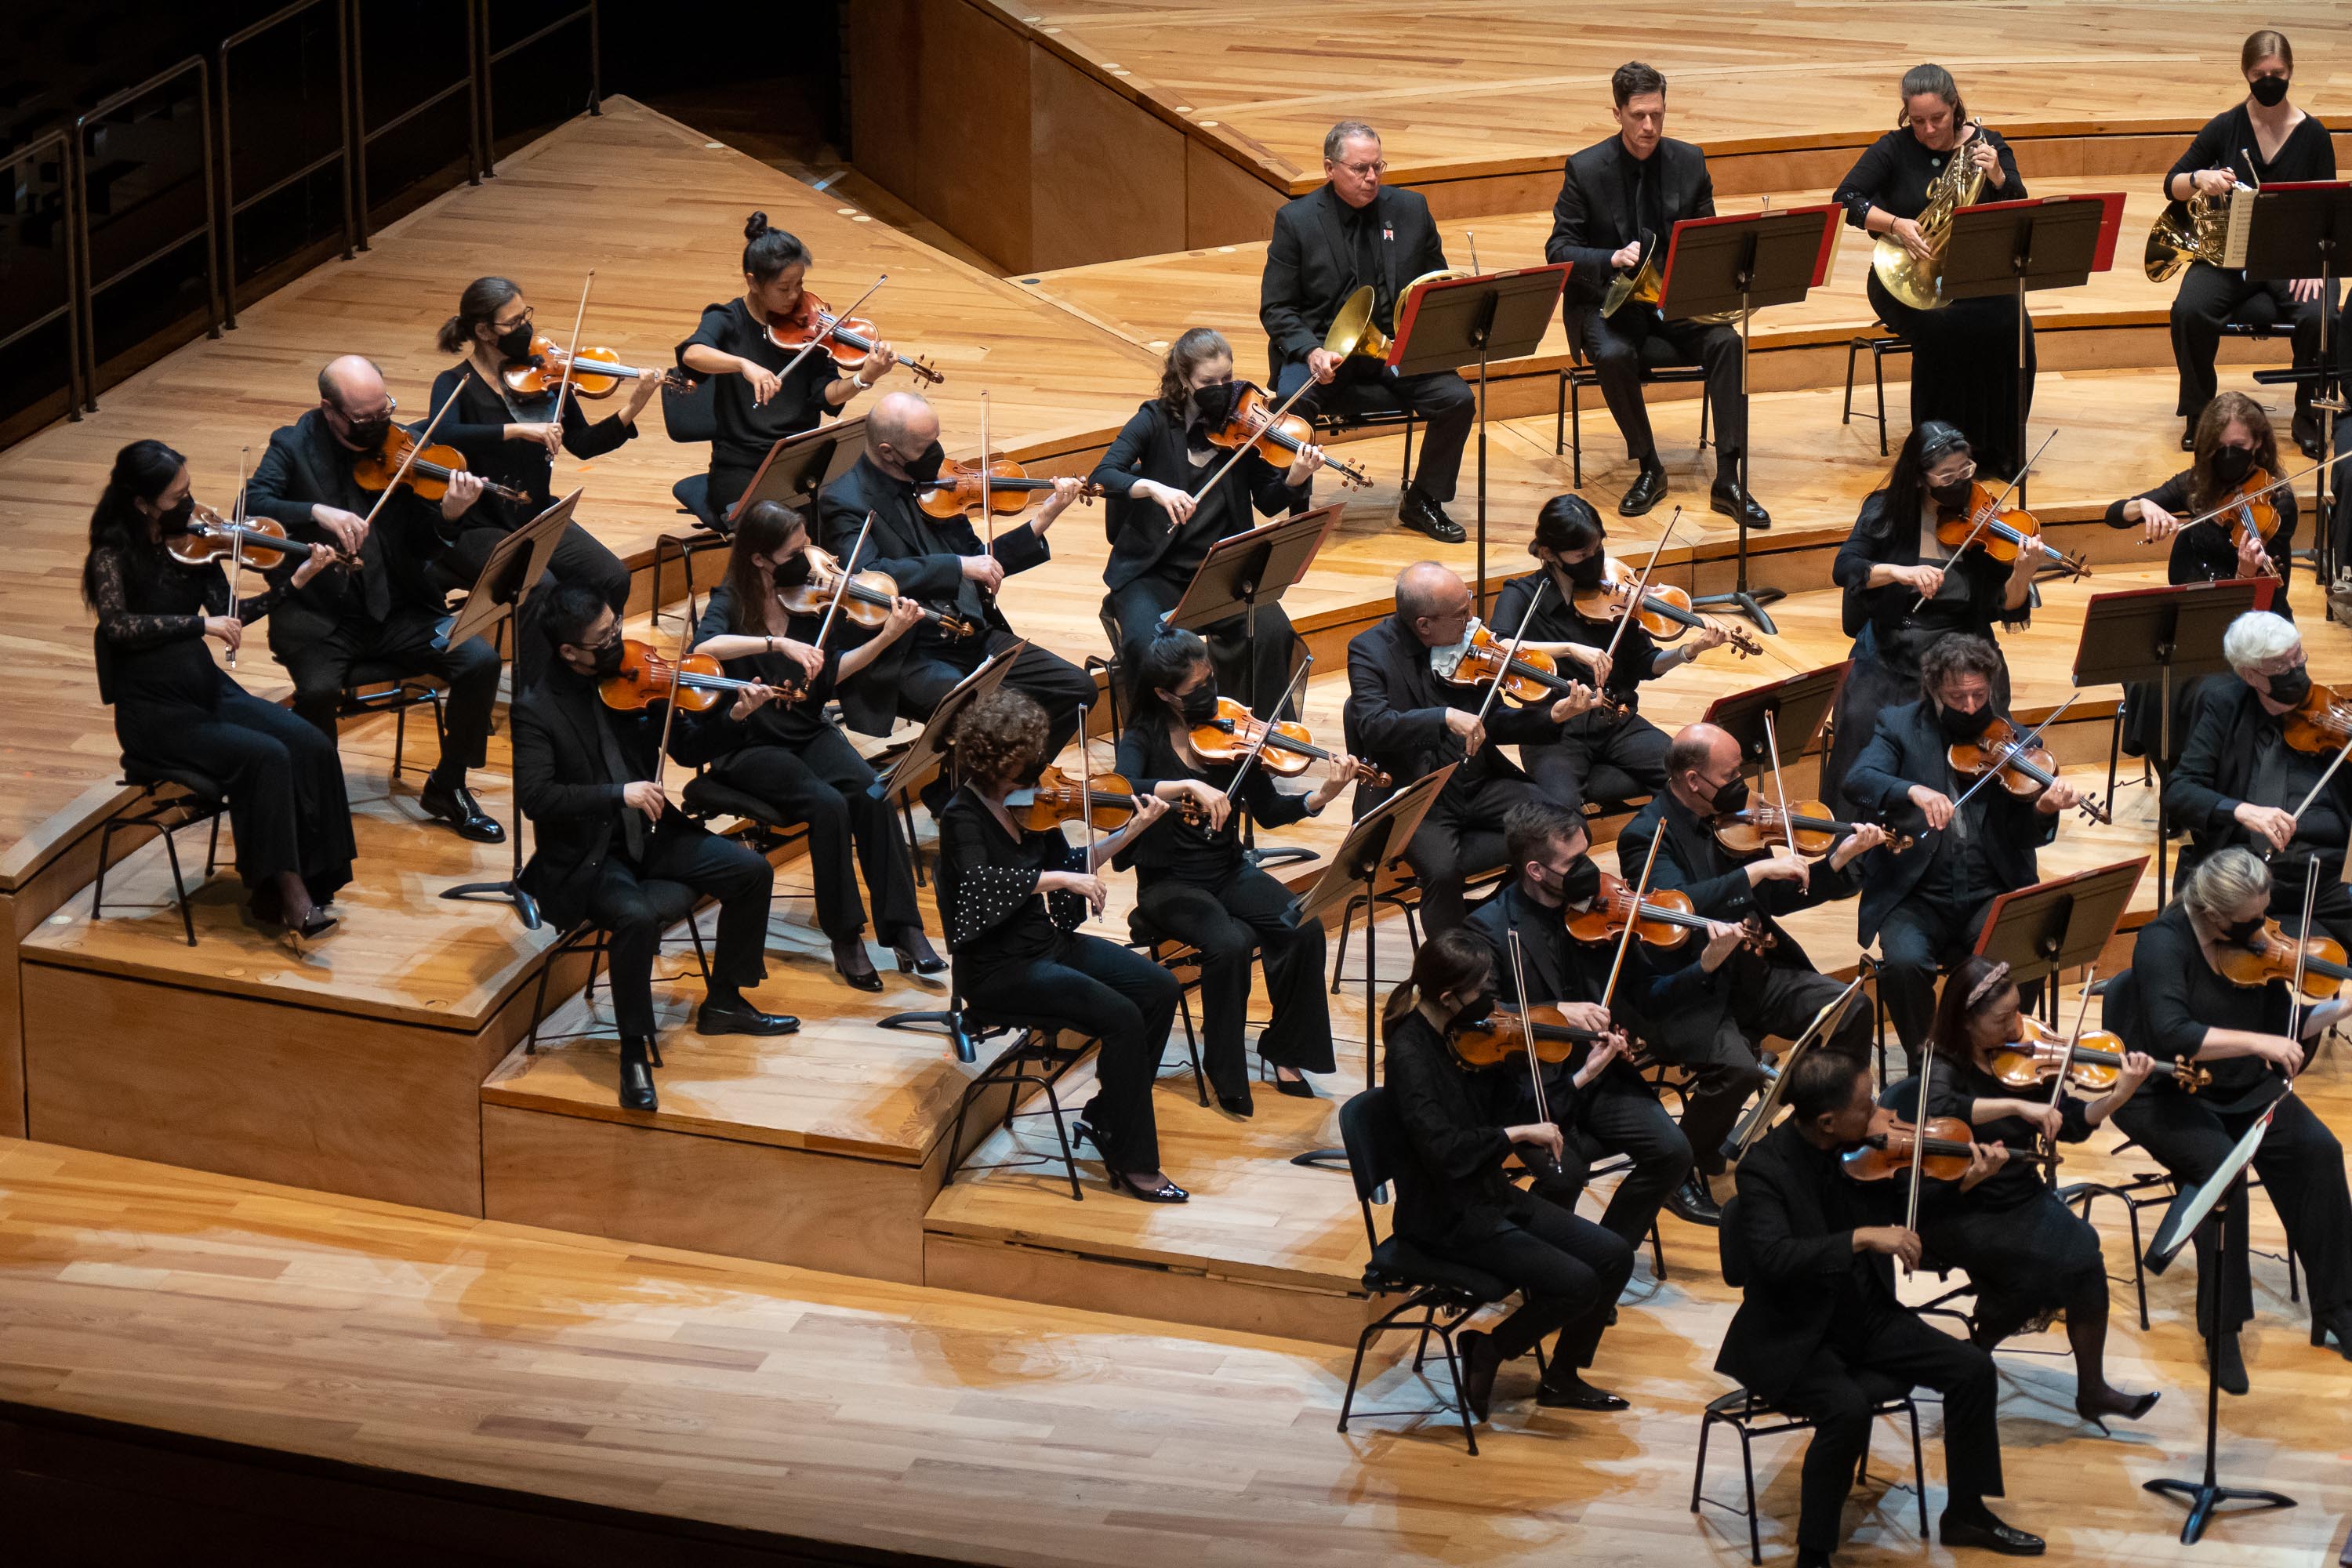 The violins during Beethoven’s monumental and groundbreaking Symphony